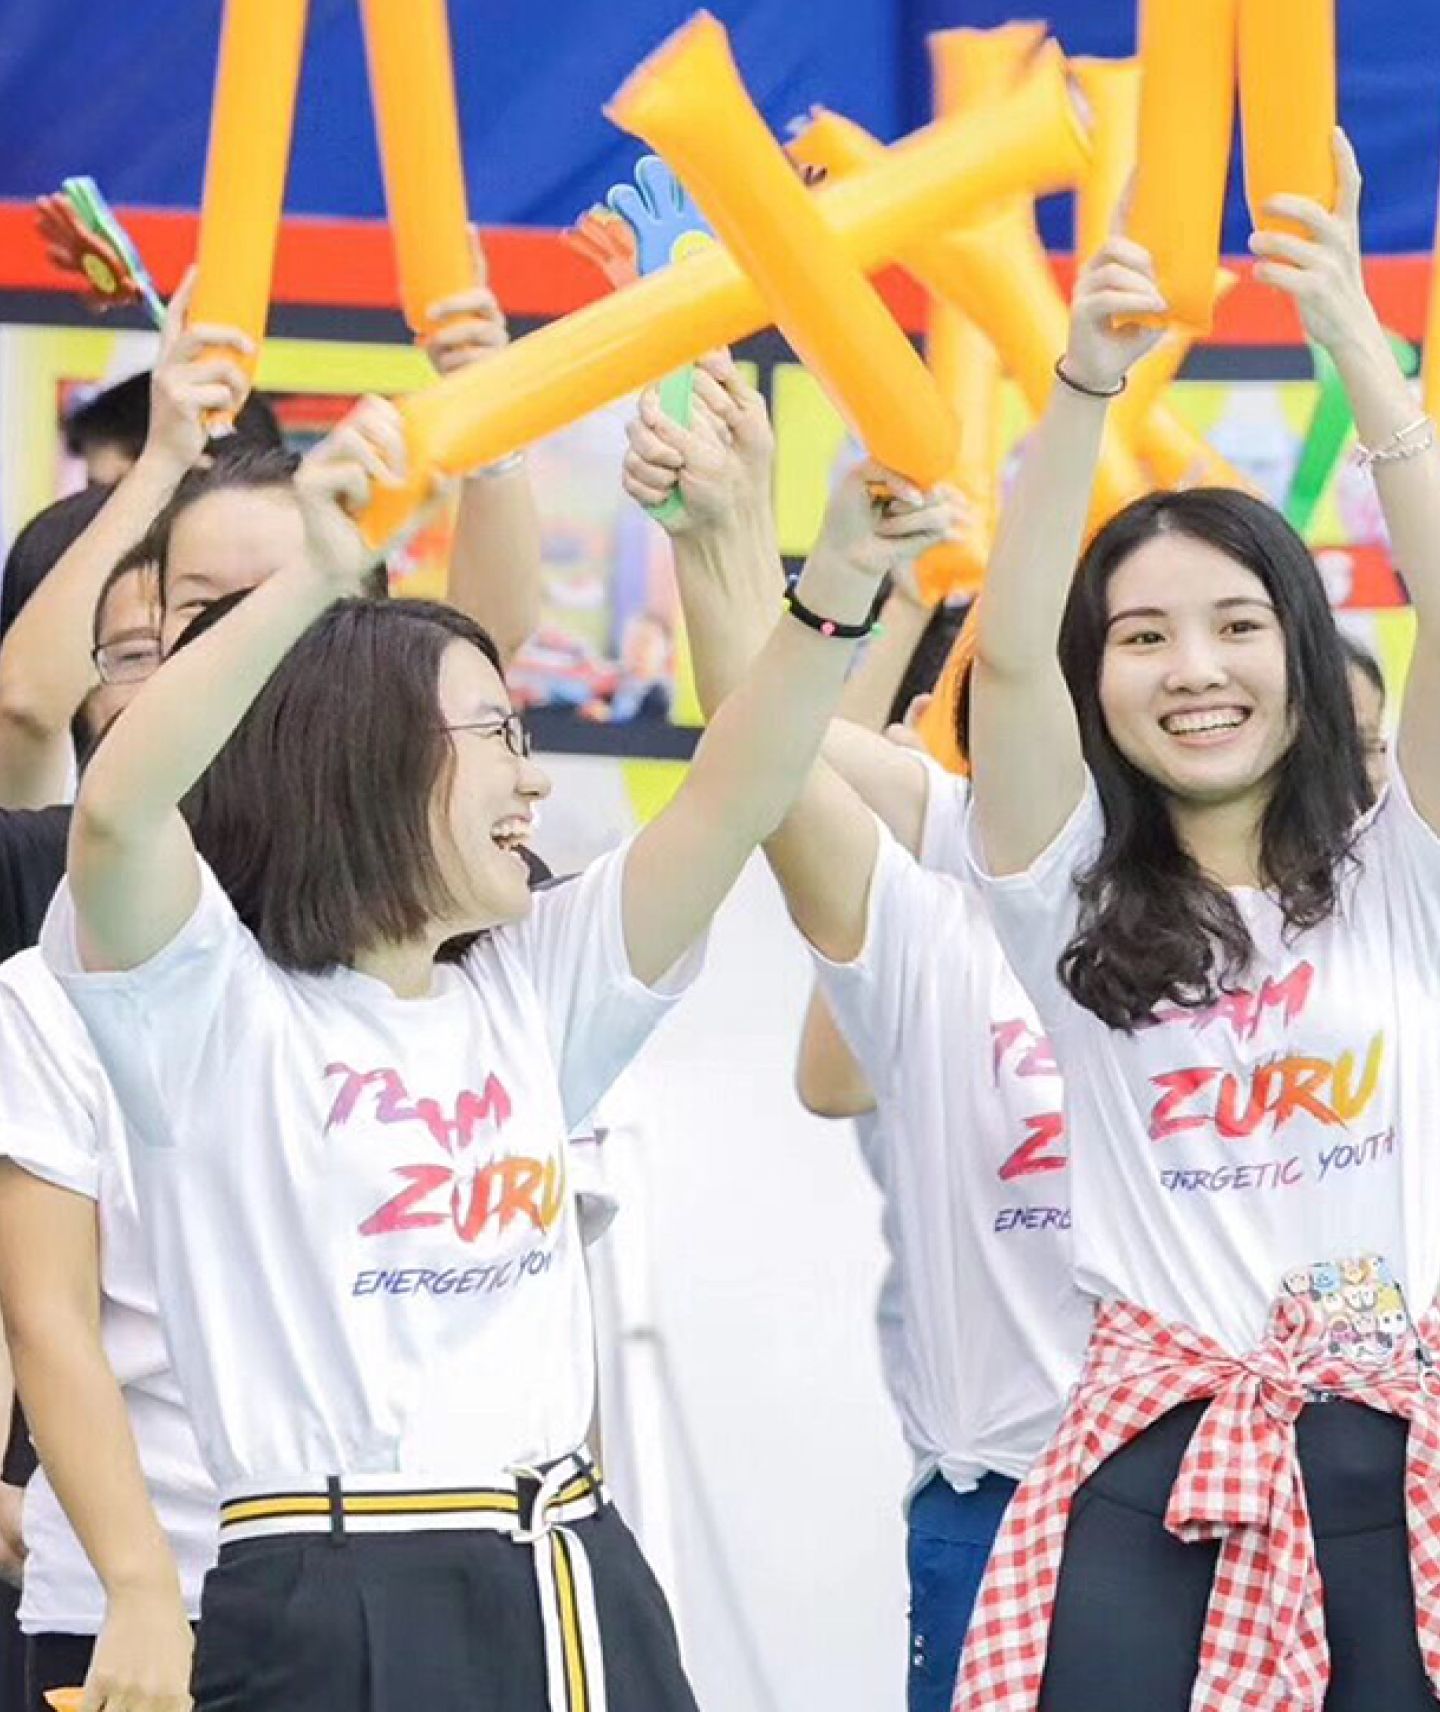 Exuberant young adults at a team event, wearing 'Team ZURU' t-shirts and cheerfully waving orange inflatable sticks, with expressions of excitement and camaraderie, set against a backdrop of a festive crowd.